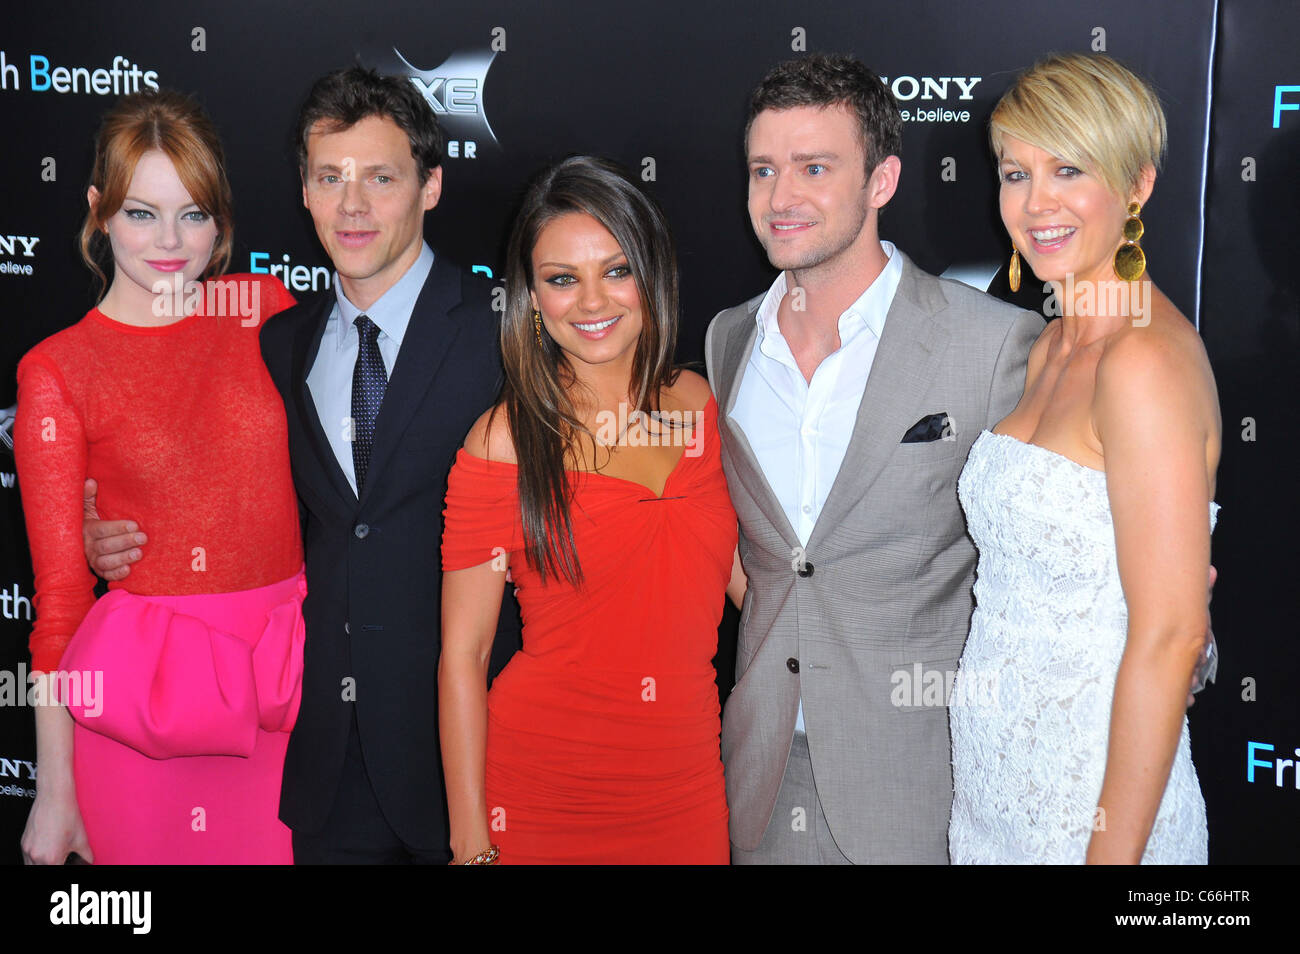 (L-R) Emma Stone, Will Gluck, Mila Kunis, Justin Timberlake, Jenna Elfman at arrivals for FRIENDS WITH BENEFITS Premiere, The Ziegfeld Theatre, New York, NY July 18, 2011. Photo By: Gregorio T. Binuya/Everett Collection Stock Photo